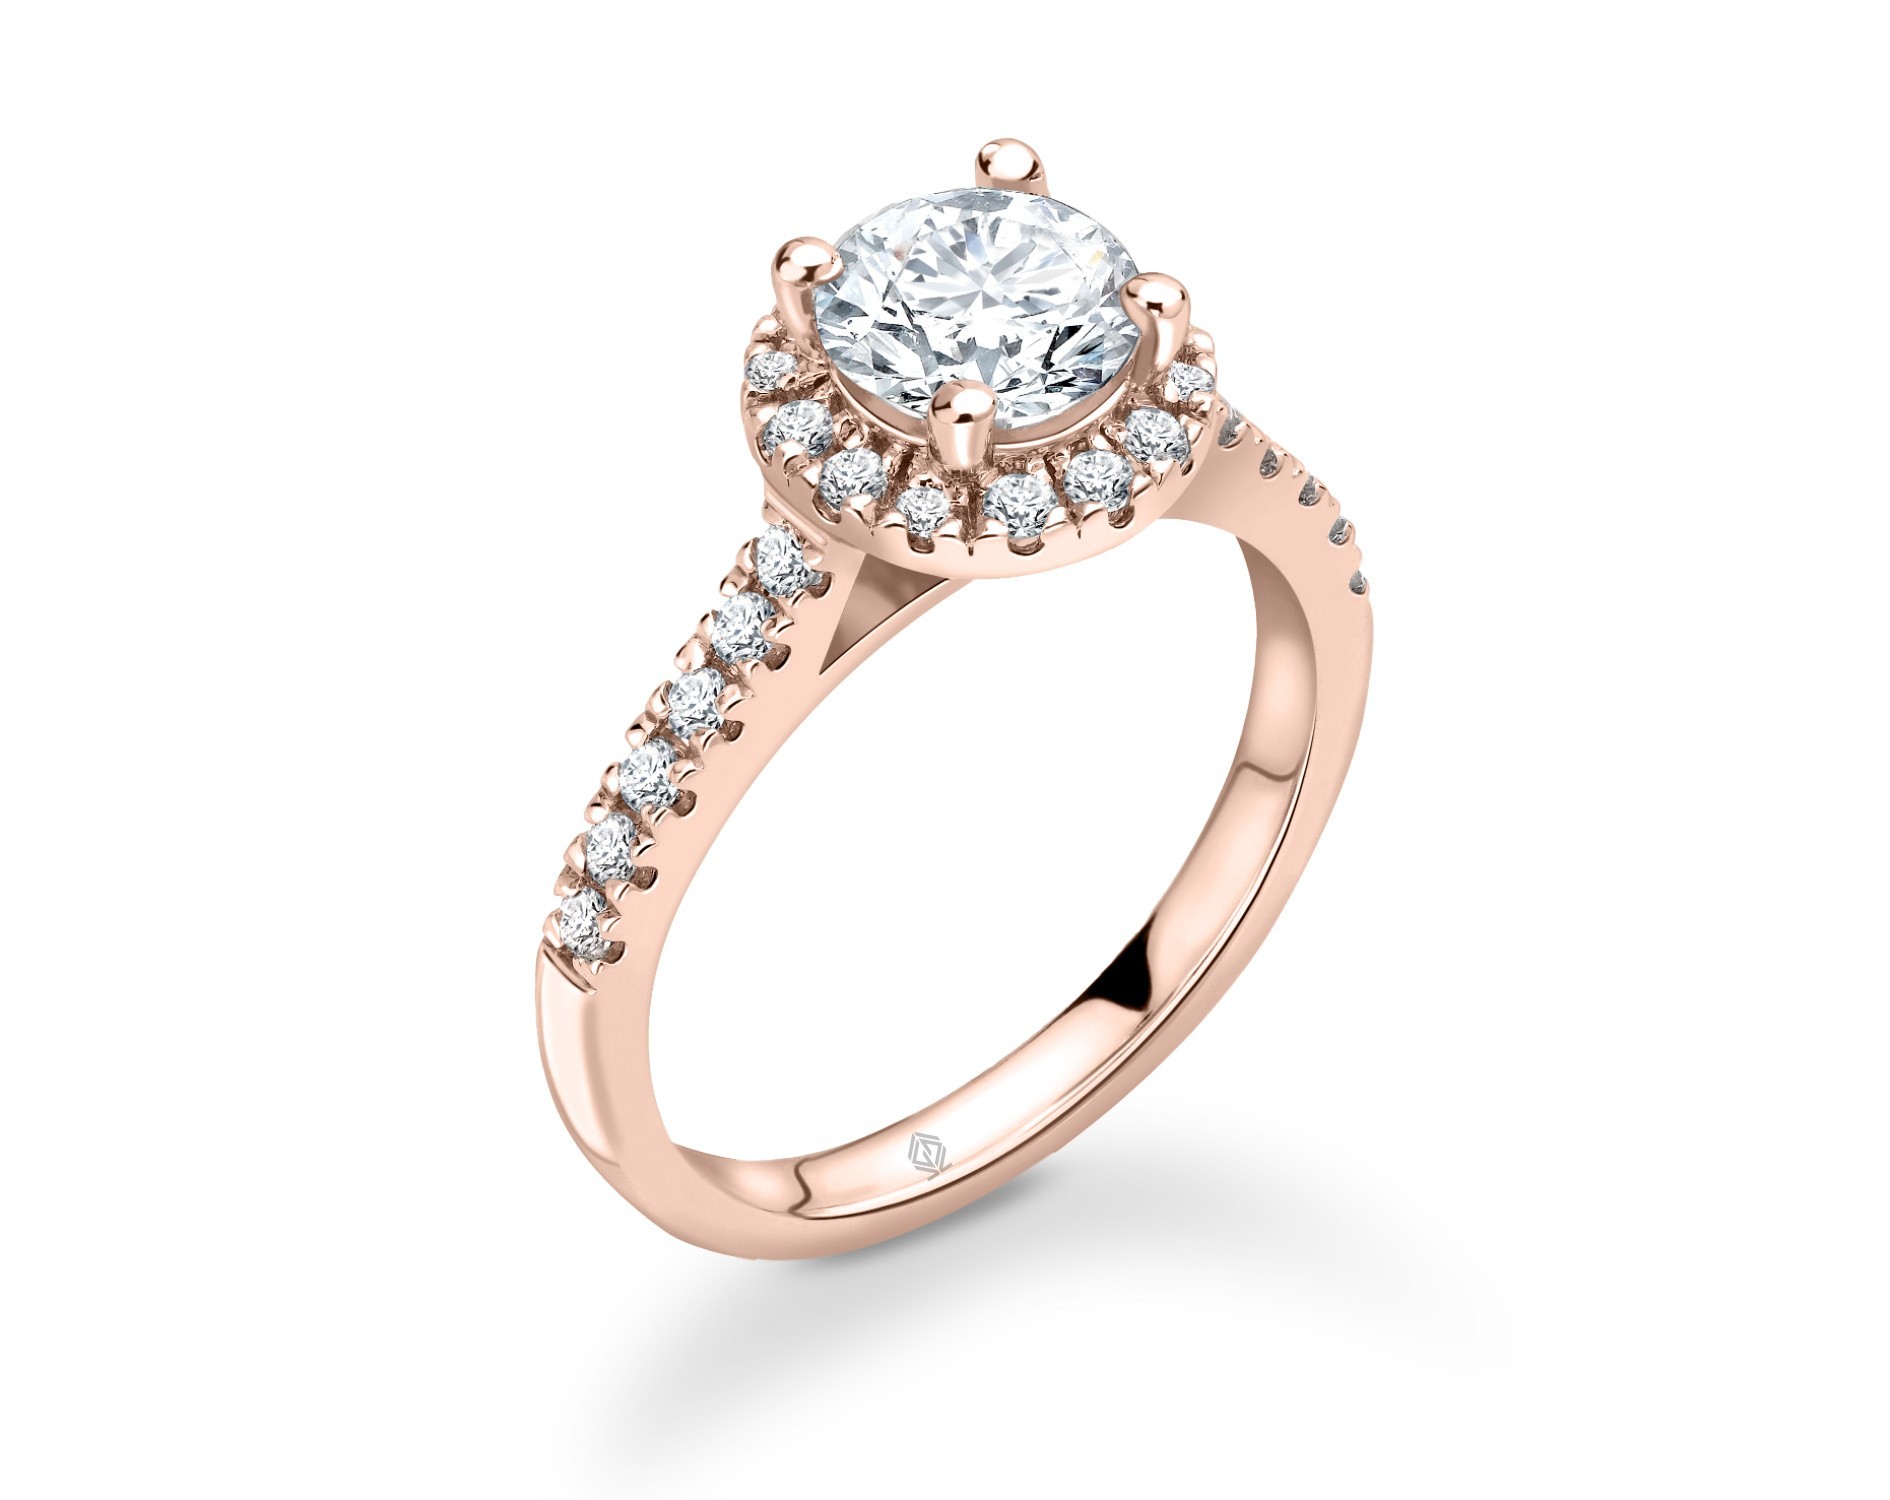 18K ROSE GOLD ROUND CUT HALO DIAMOND ENGAGEMENT RING WITH SIDE STONES IN PAVE SET